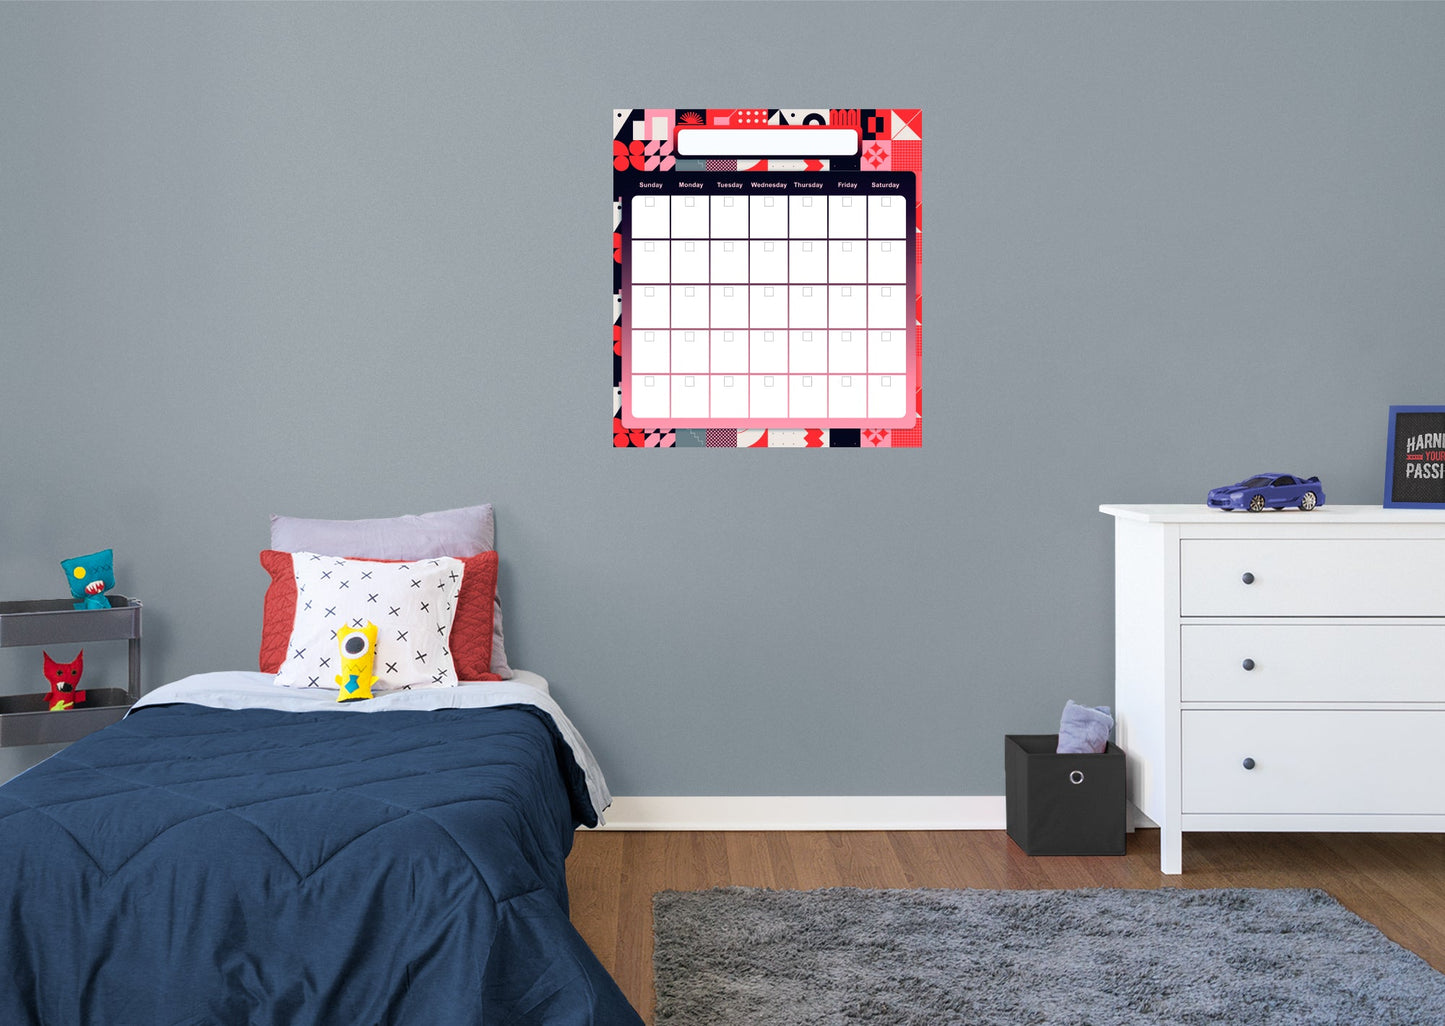 Calendars: Geometric One Month Calendar Dry Erase - Removable Adhesive Decal